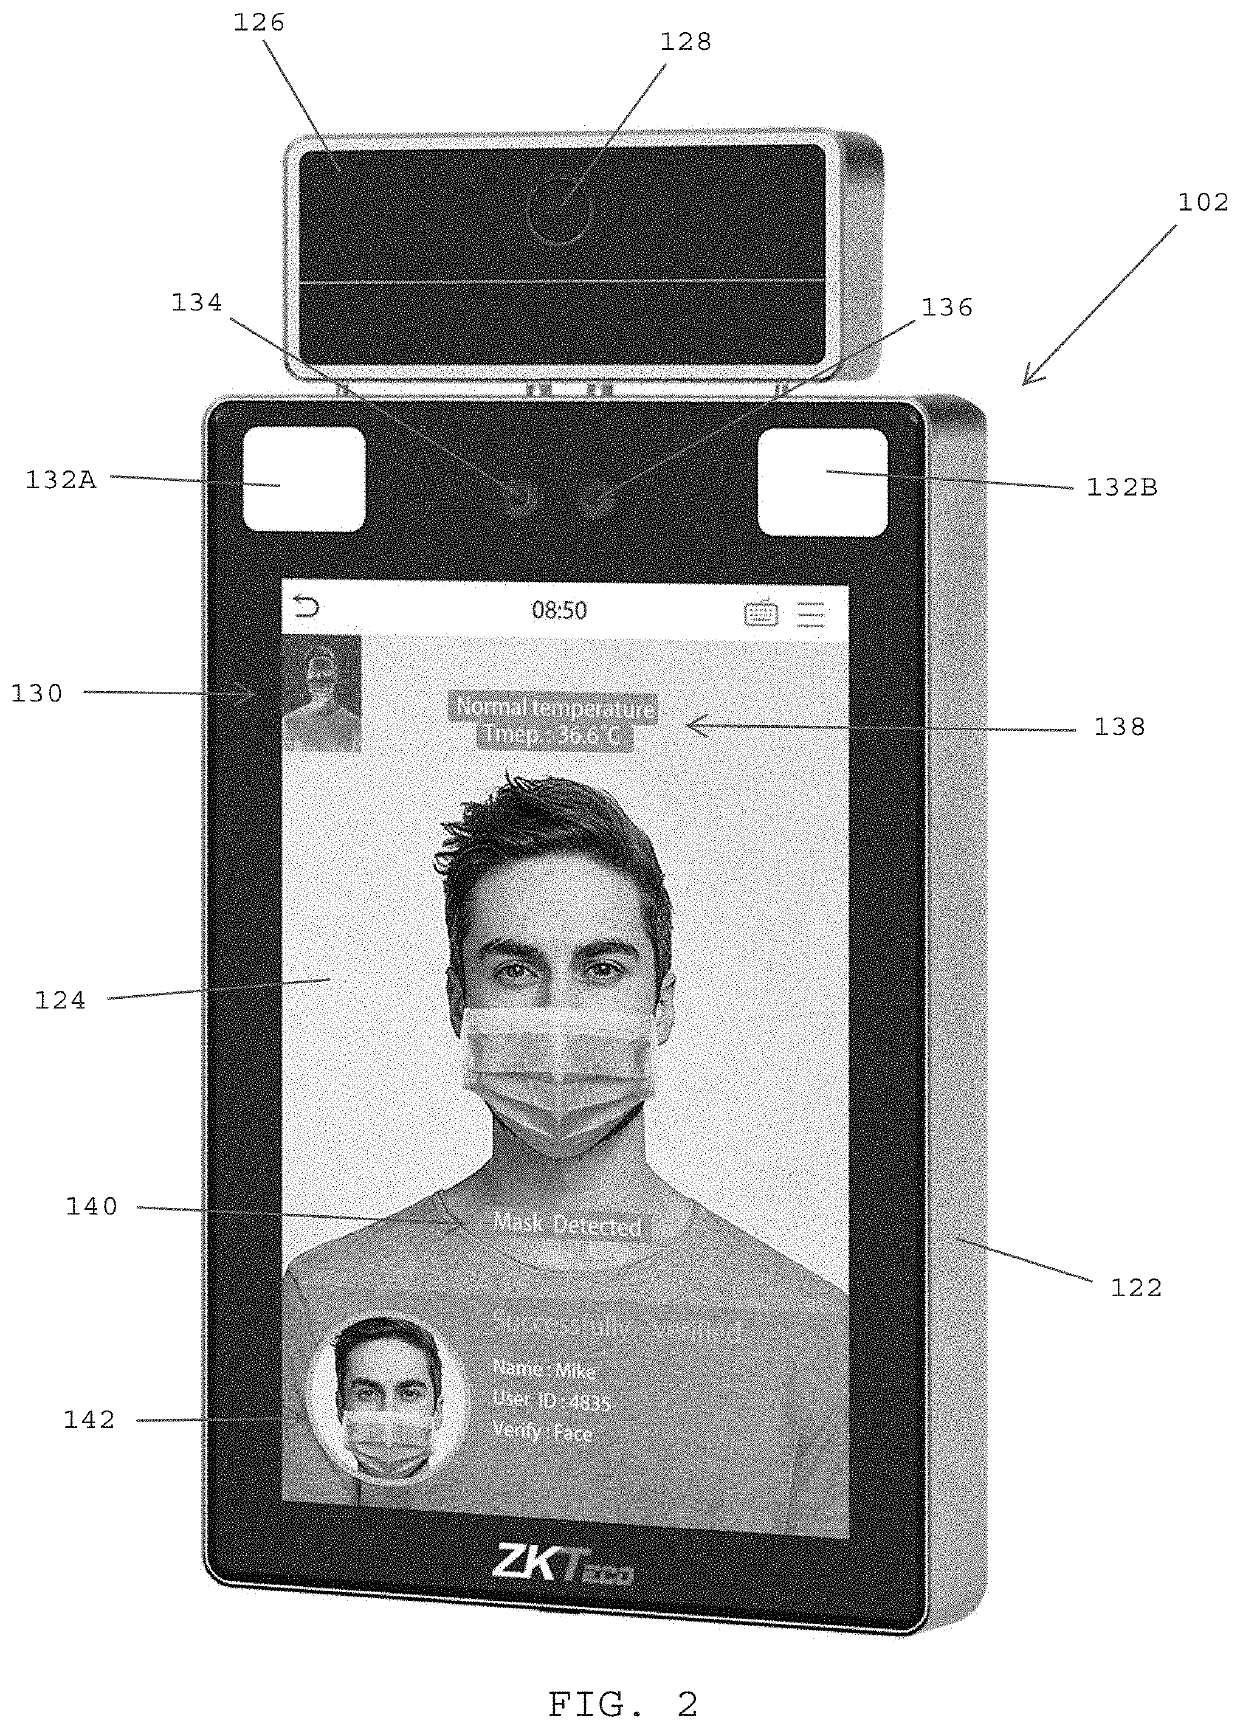 Unattended touchless health-check screening systems incorporating biometrics and thermographic technologies